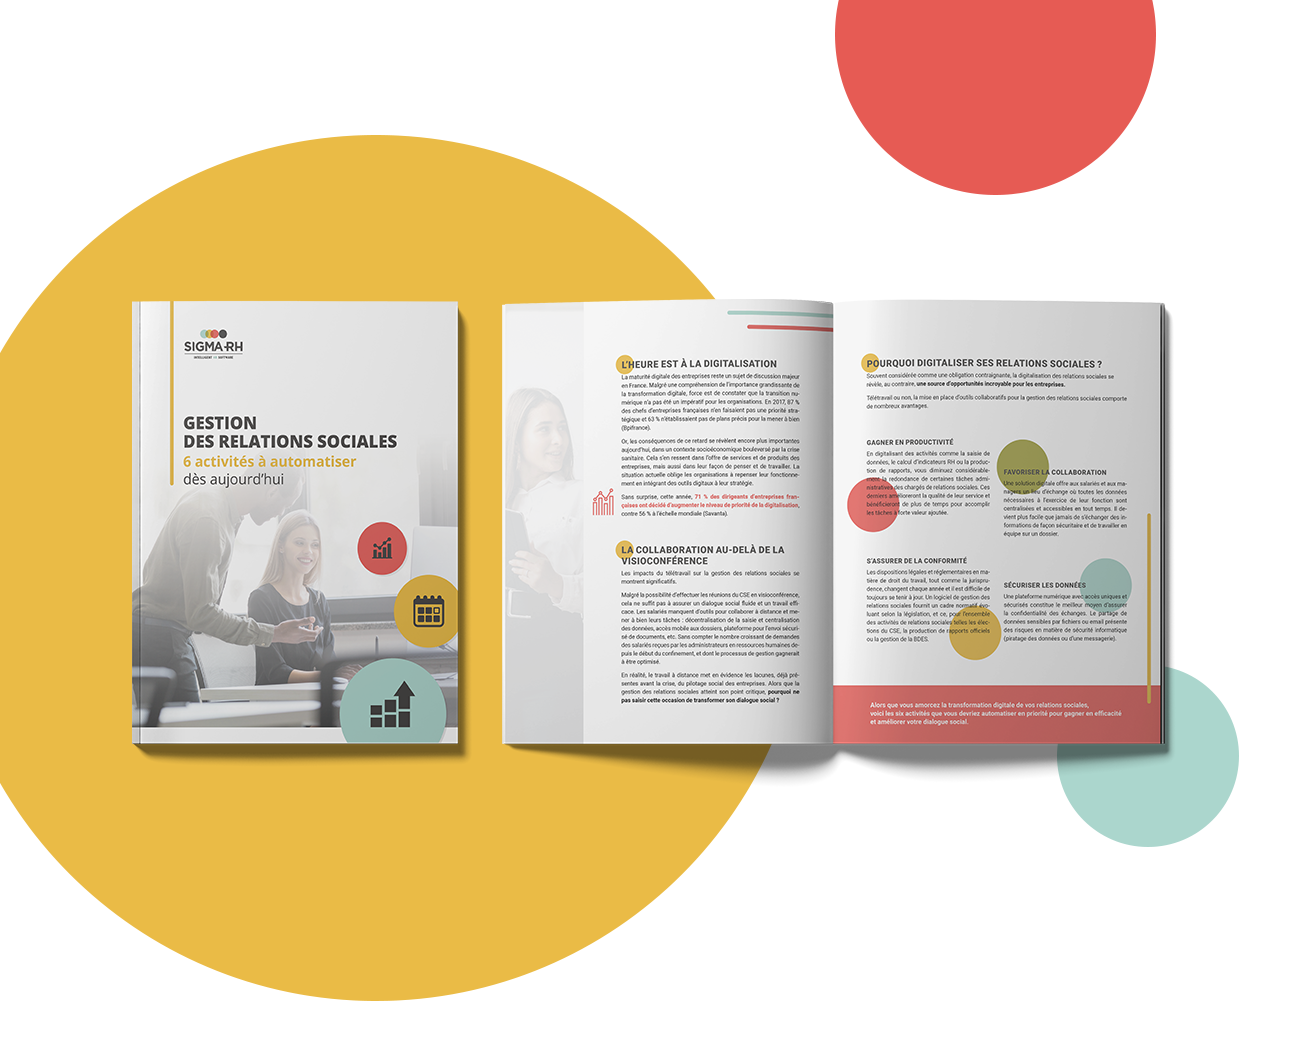 Lead generation campaign and white paper created for our client SigmaRH